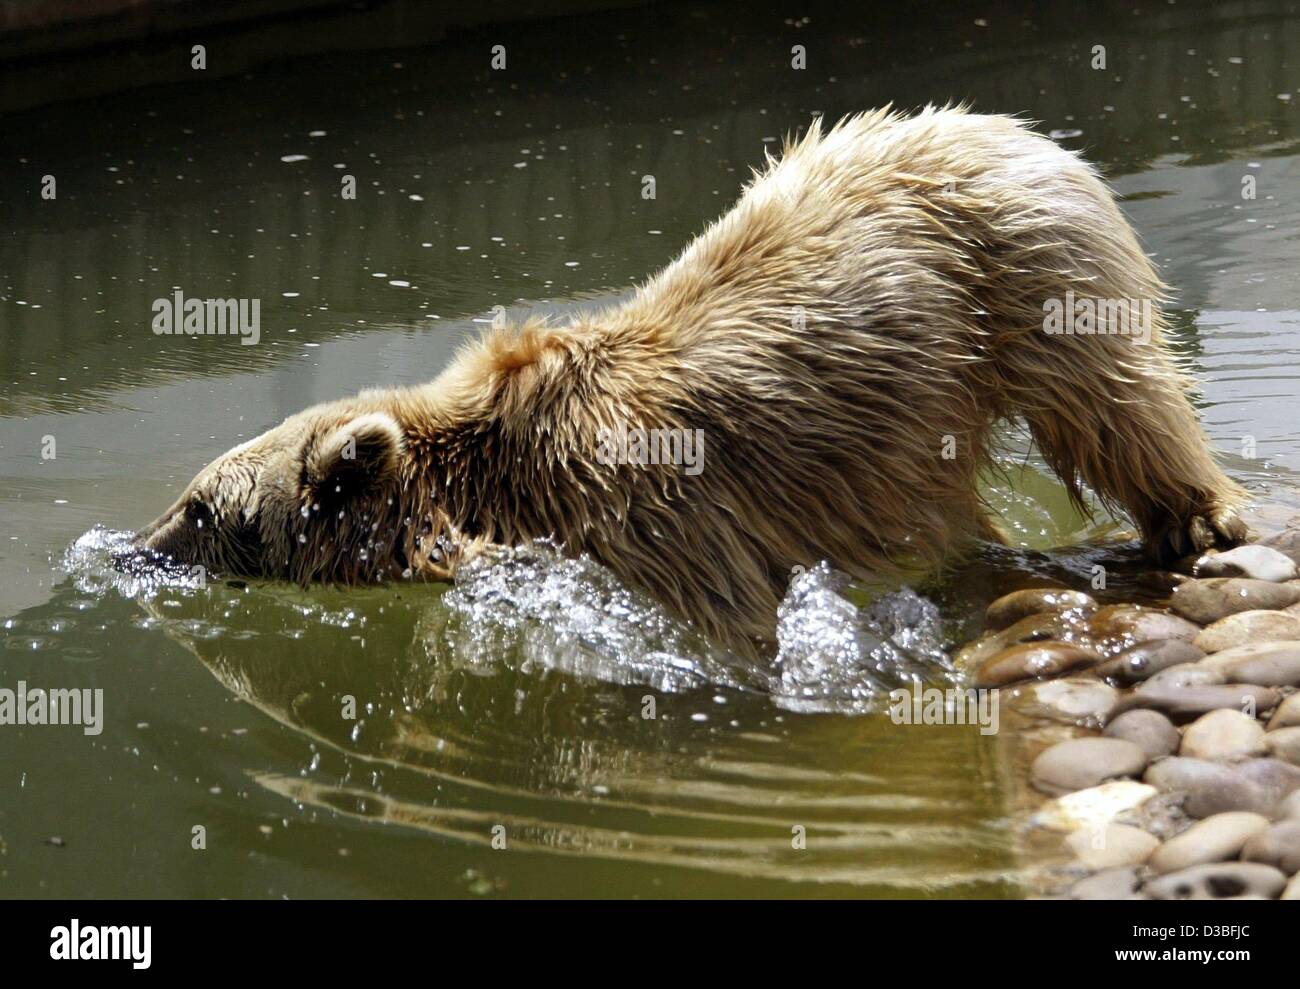 (dpa) - A Syrian brown bear dives head-first into the cool water in the zoo in Heidelberg, Germany, 10 June 2003. In these hot summer days the warm fur is all too uncomfortable... Stock Photo